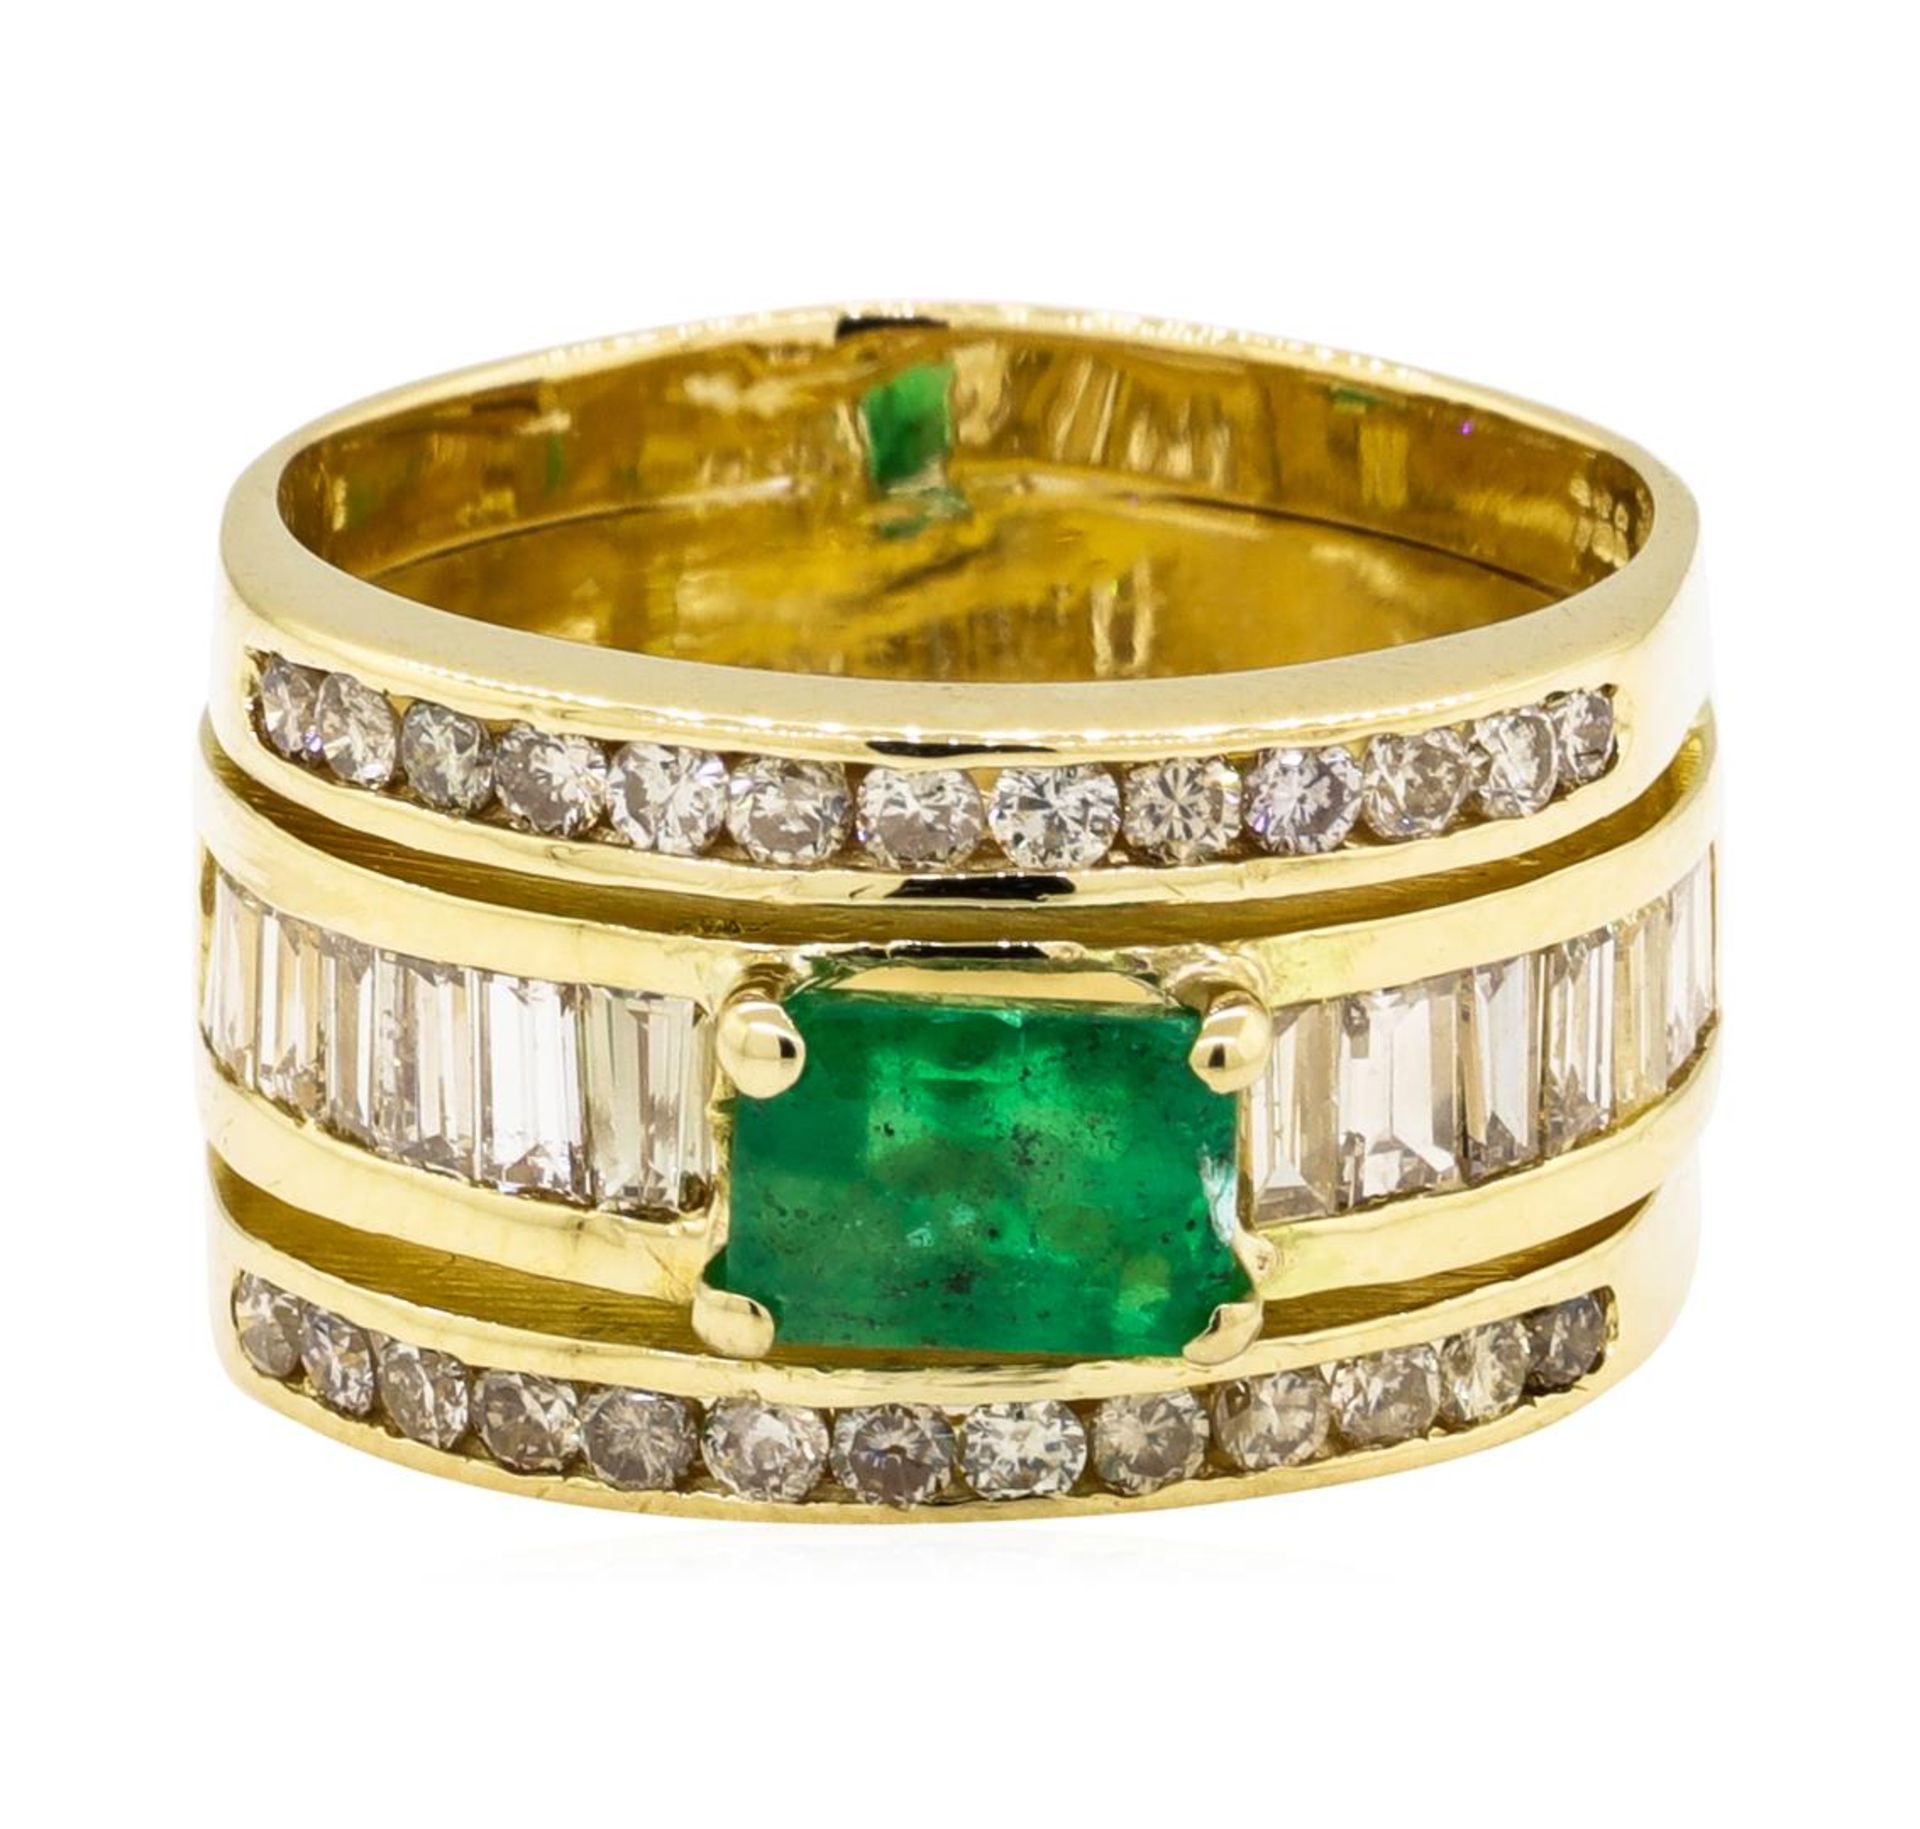 0.90 ctw ct Emerald and Diamond Ring - 18KT Yellow Gold - Image 2 of 5